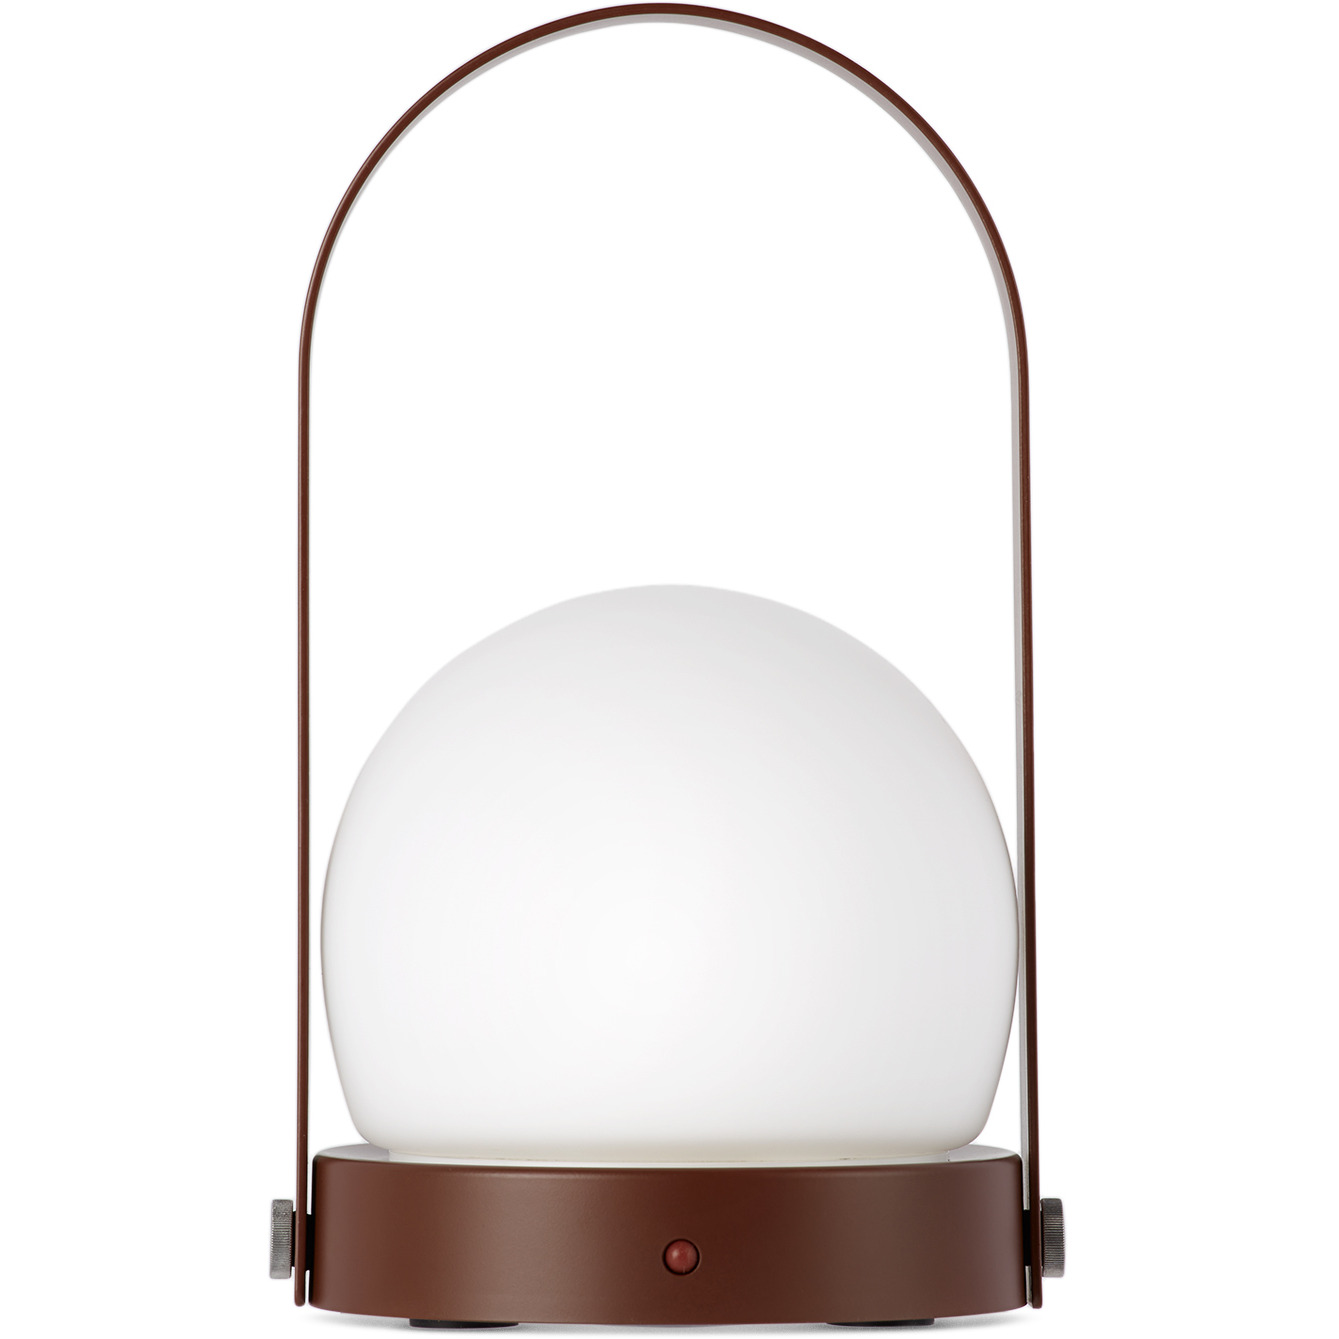 MENU Burgundy Norm Architects Edition Carrie Portable Table Lamp - image 1